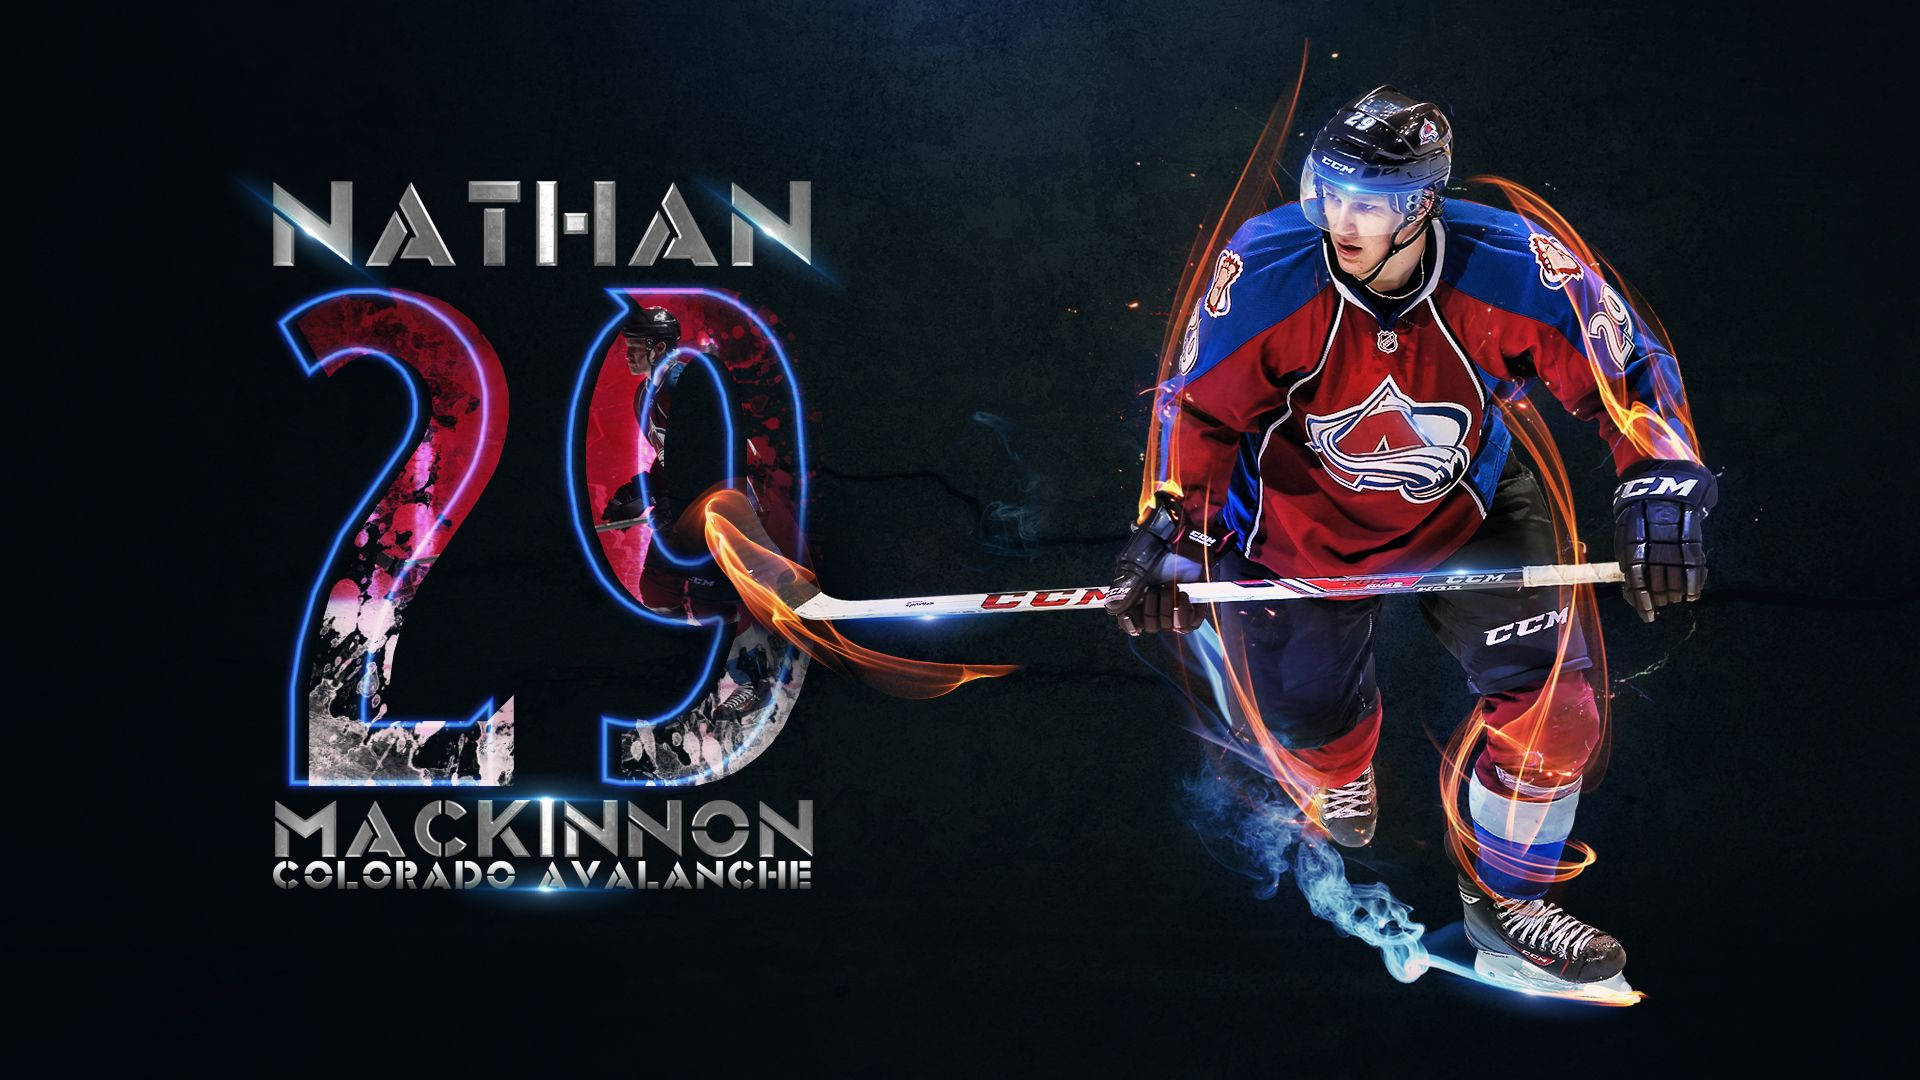 Nathan Mackinnon Graphic Fire Effects Wallpaper